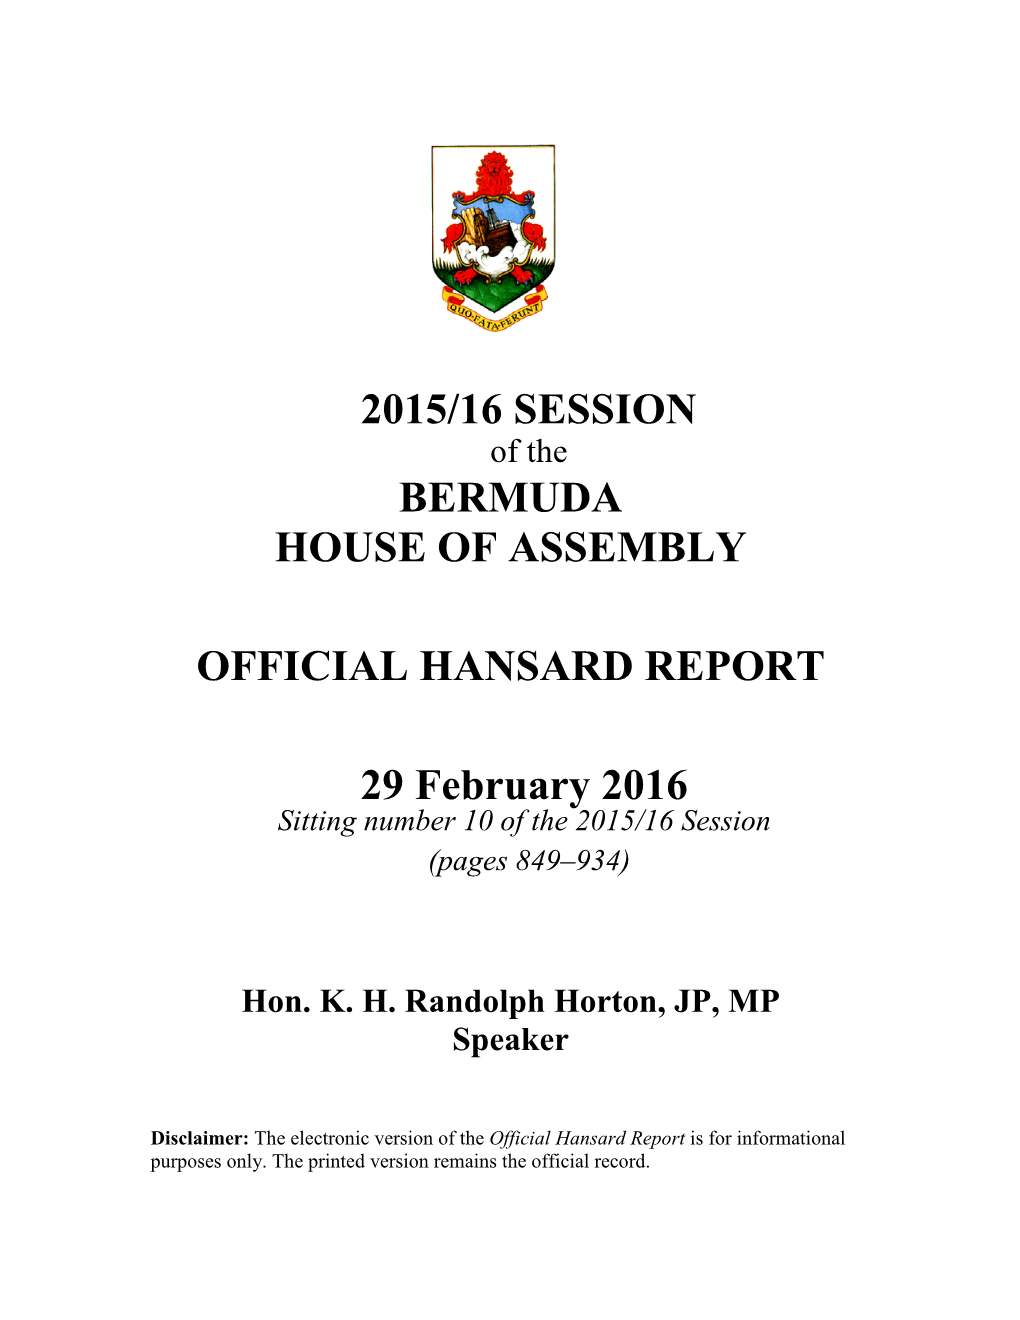 2015/16 Session Bermuda House of Assembly Official